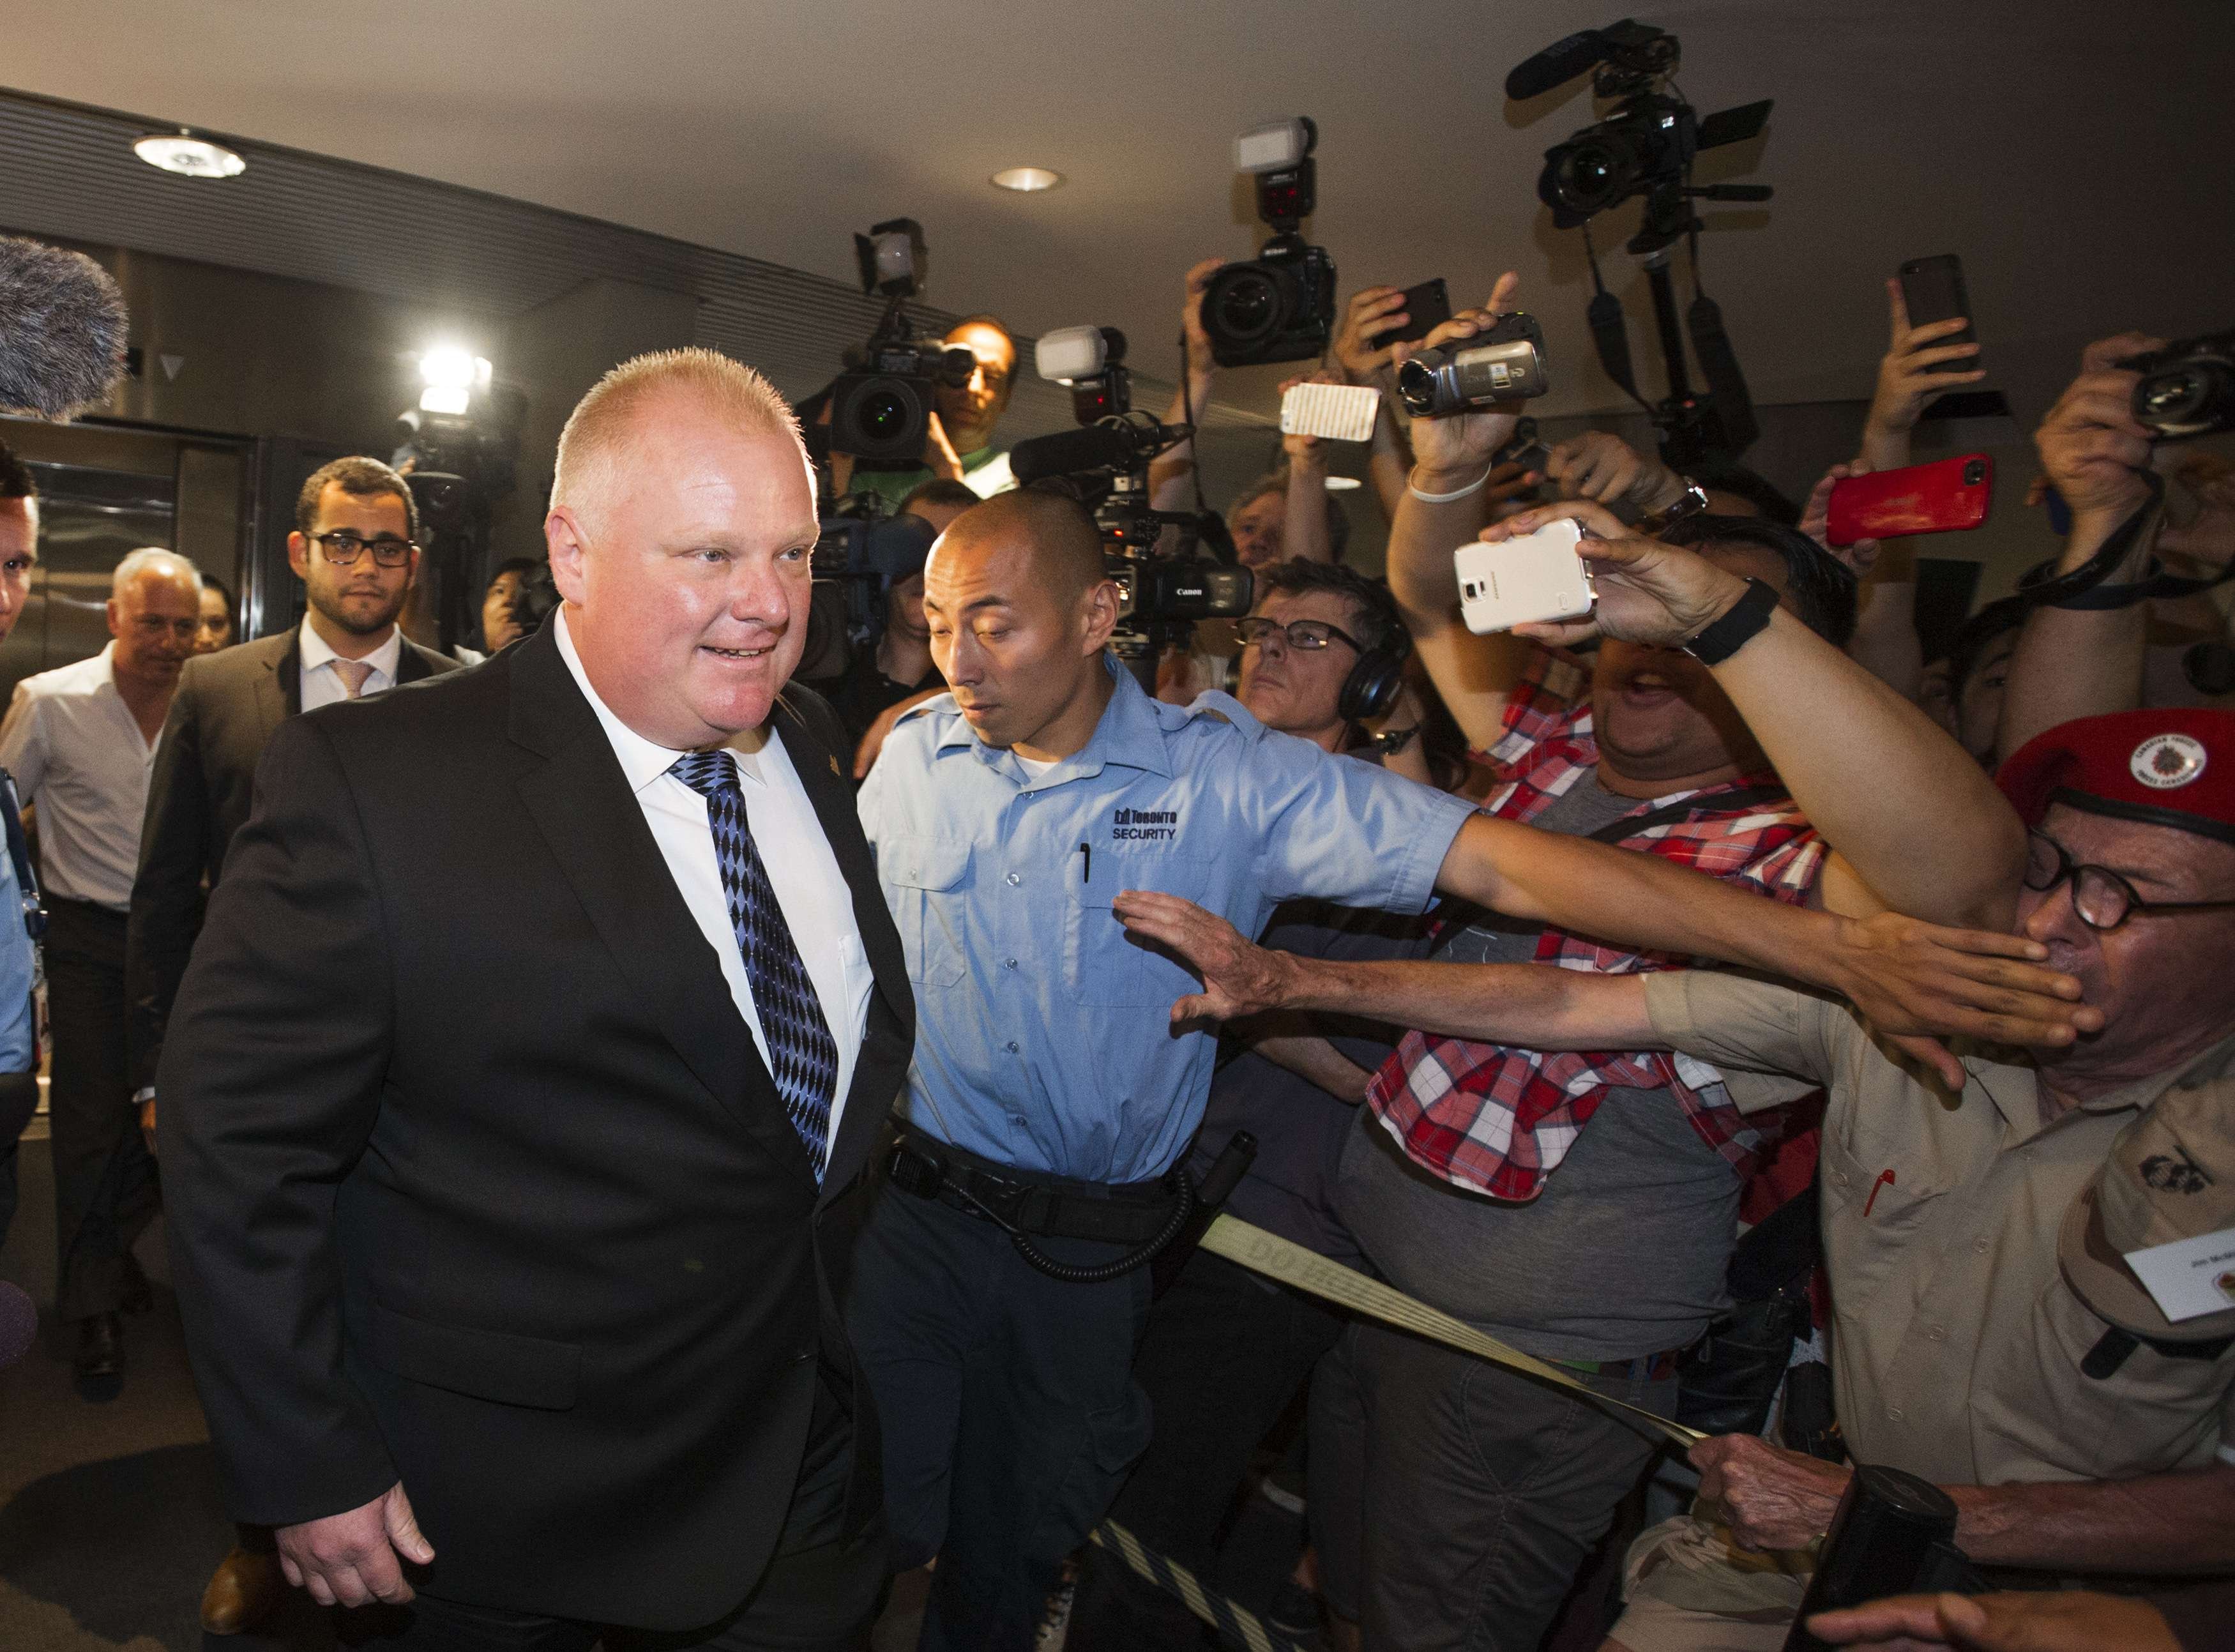 Toronto Mayor Ford arrives at City Hall in Toronto